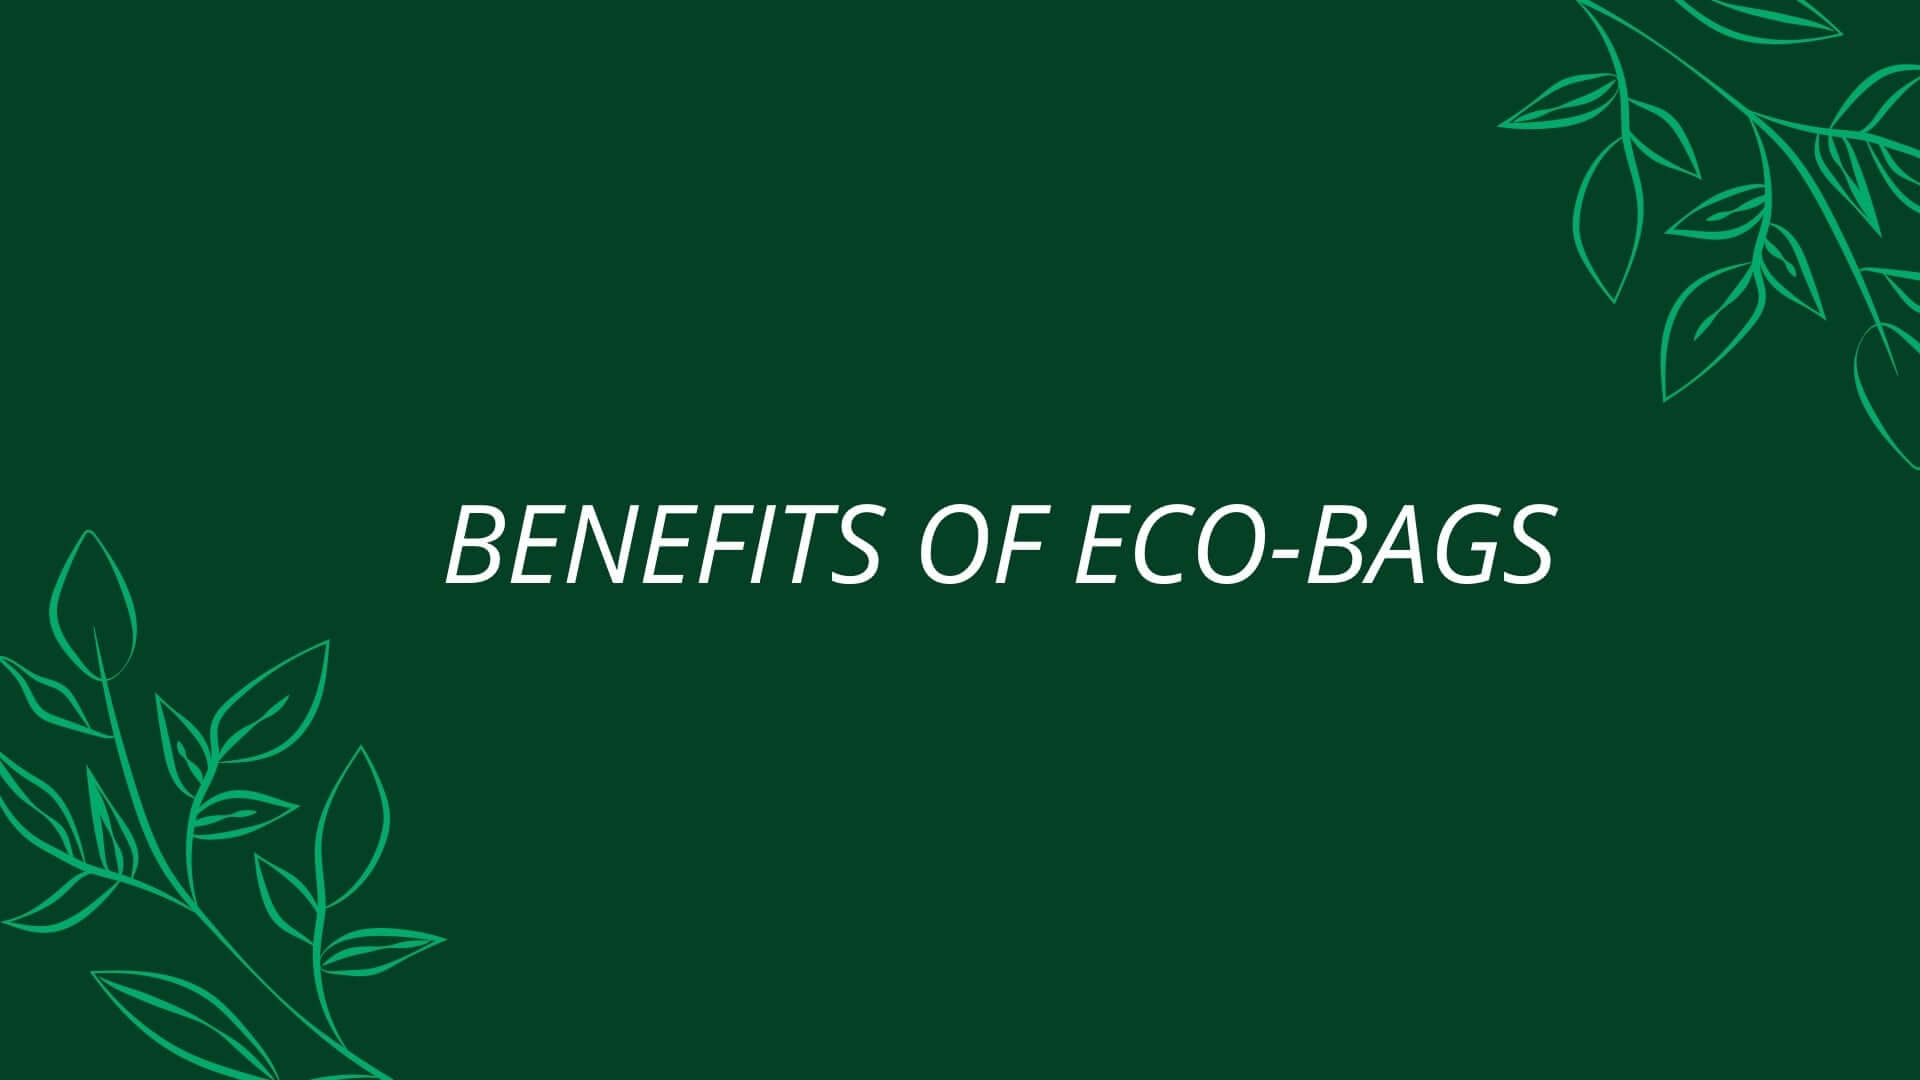 What Are The Benefits Of Reusable and Eco-Friendly Bags?